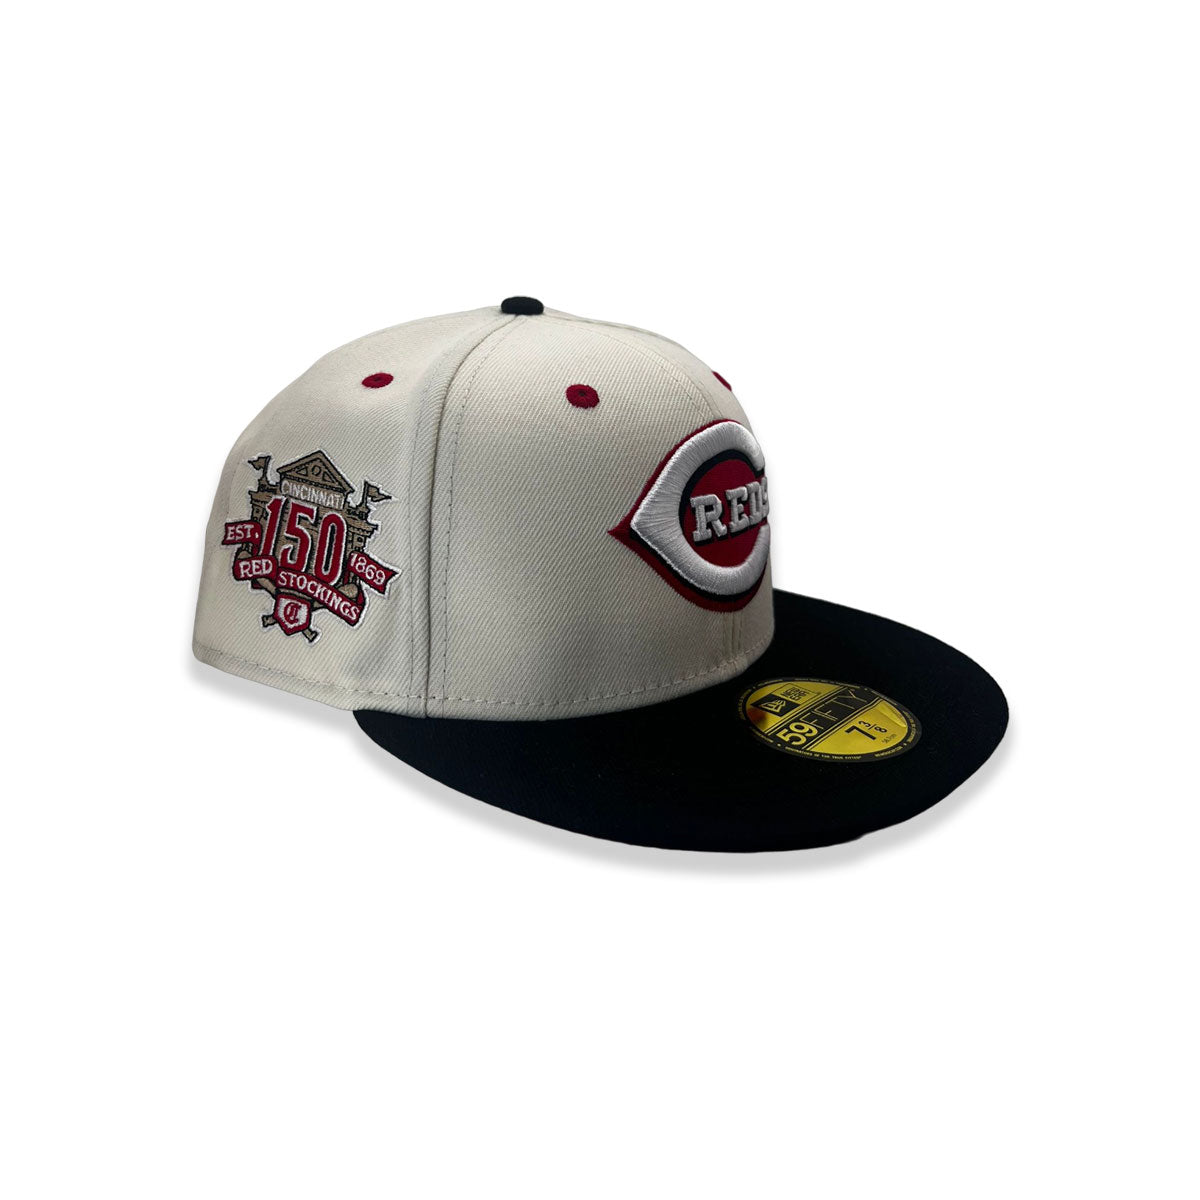 New Era Cincinnati Reds 150th anniversary 1869 Patch 59Fifty Fitted